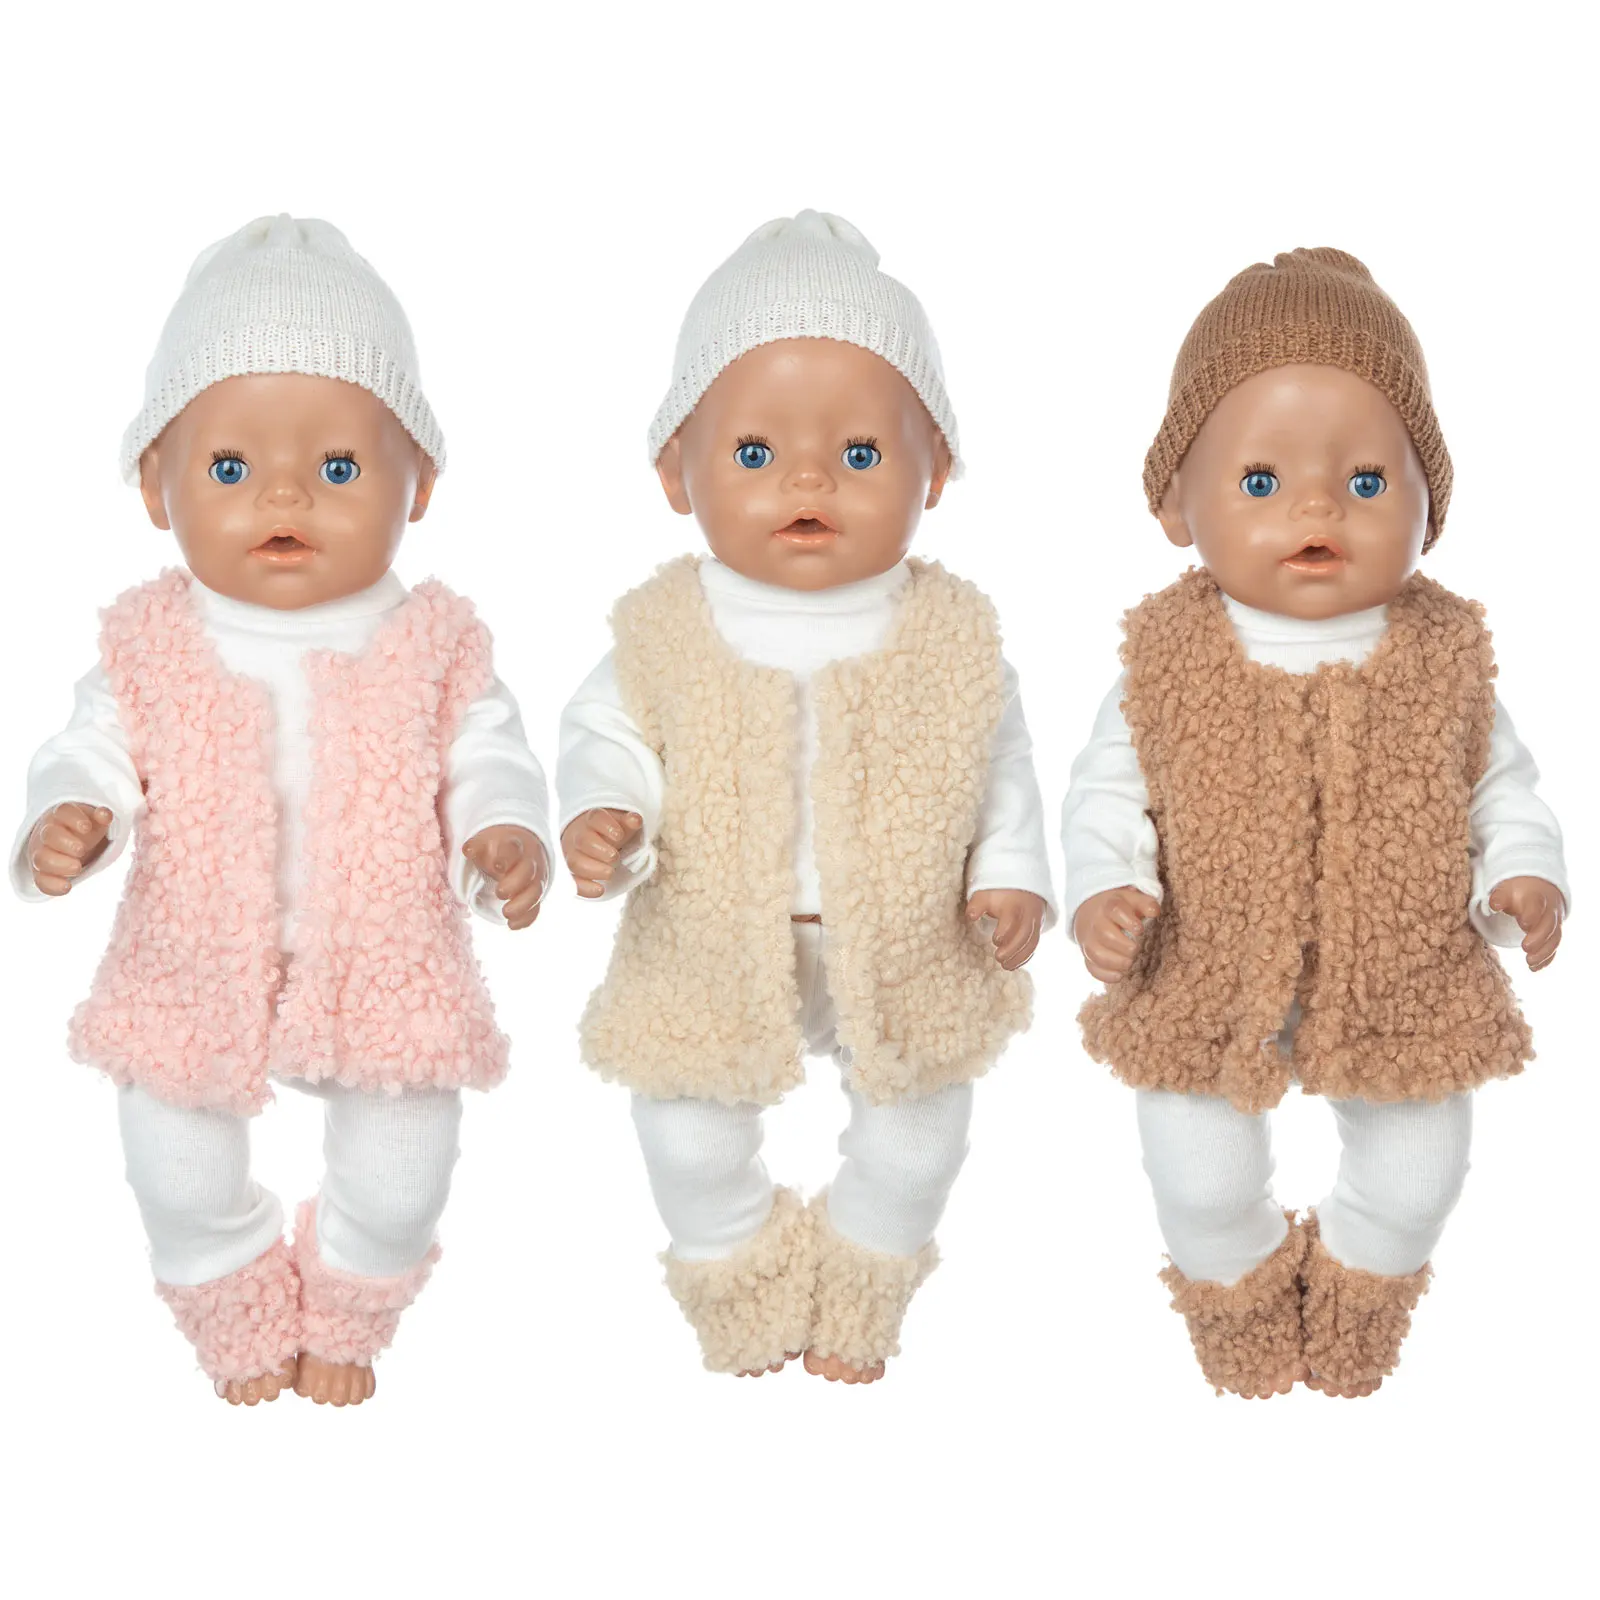 

3pcs in 1，New Lamb wool clothes Set Fit For 43cm Baby Doll 17 Inch Reborn Baby Doll Clothes, Shoes are not included